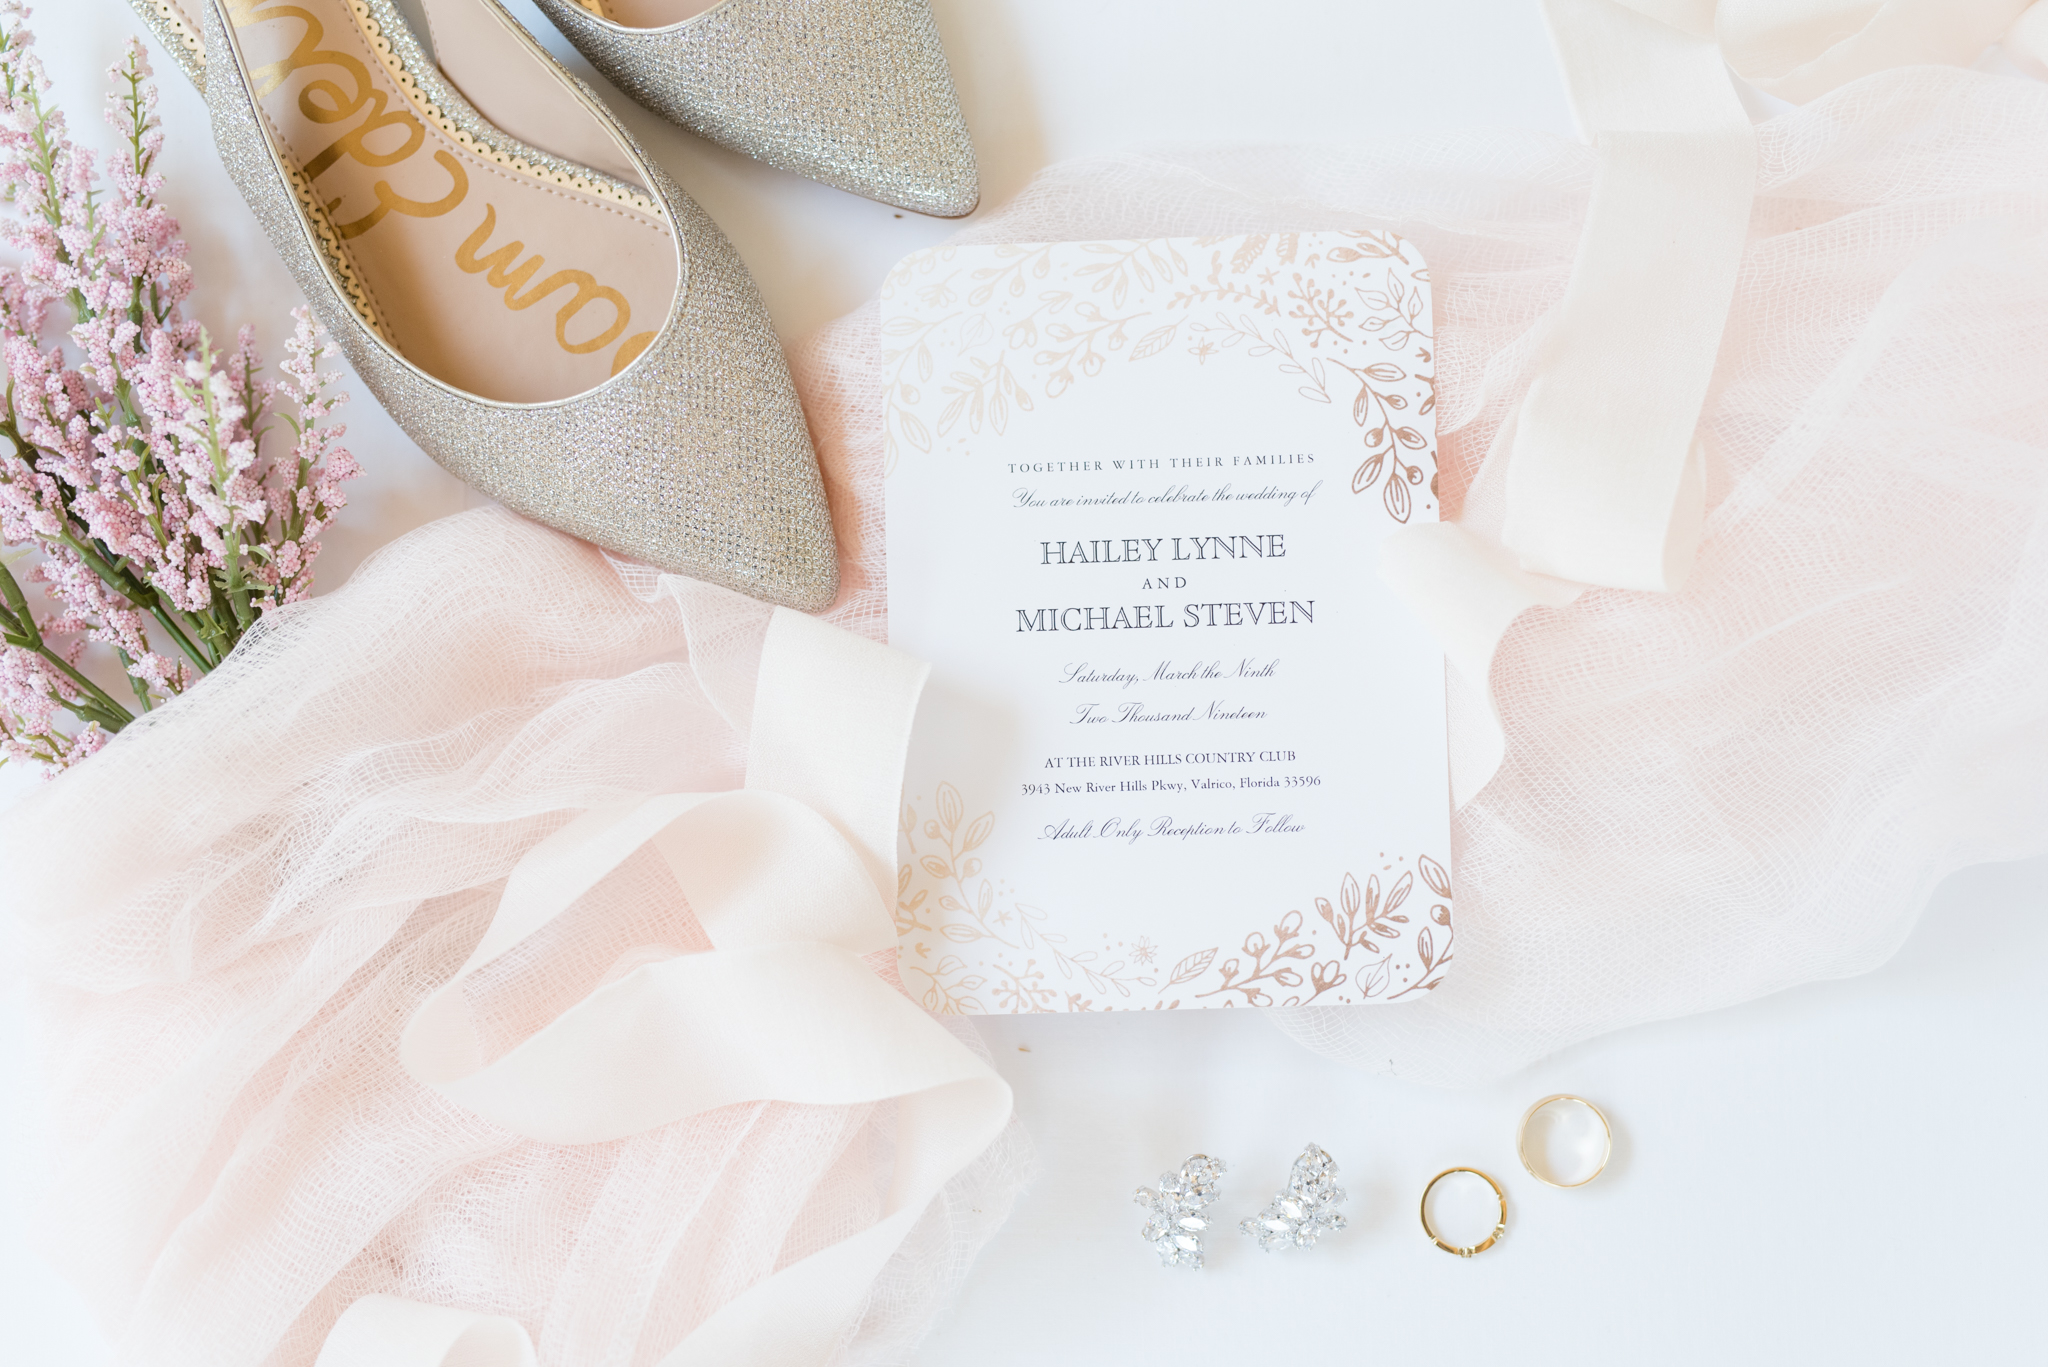 Wedding invitation, shoes, and ring.